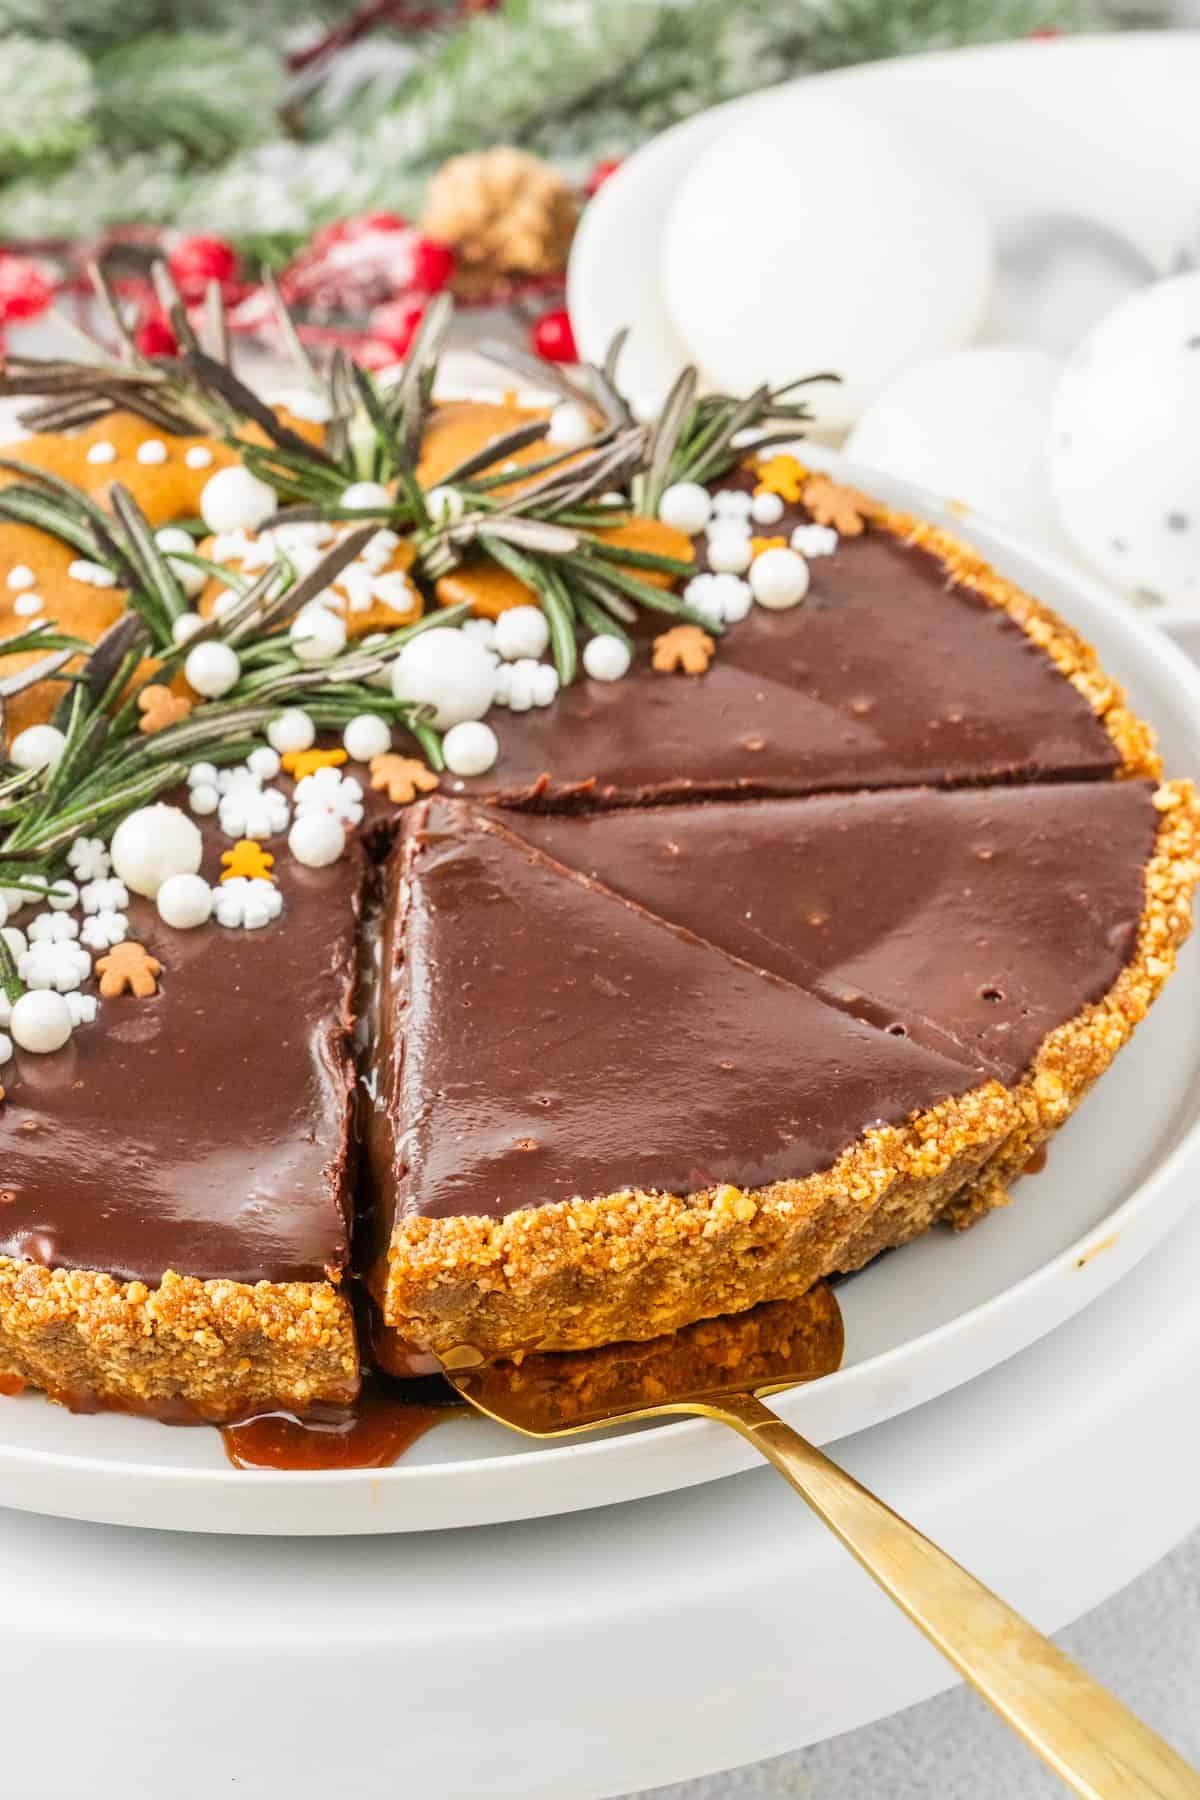 A gingerbread chocolate tart with rosemary on a plate.